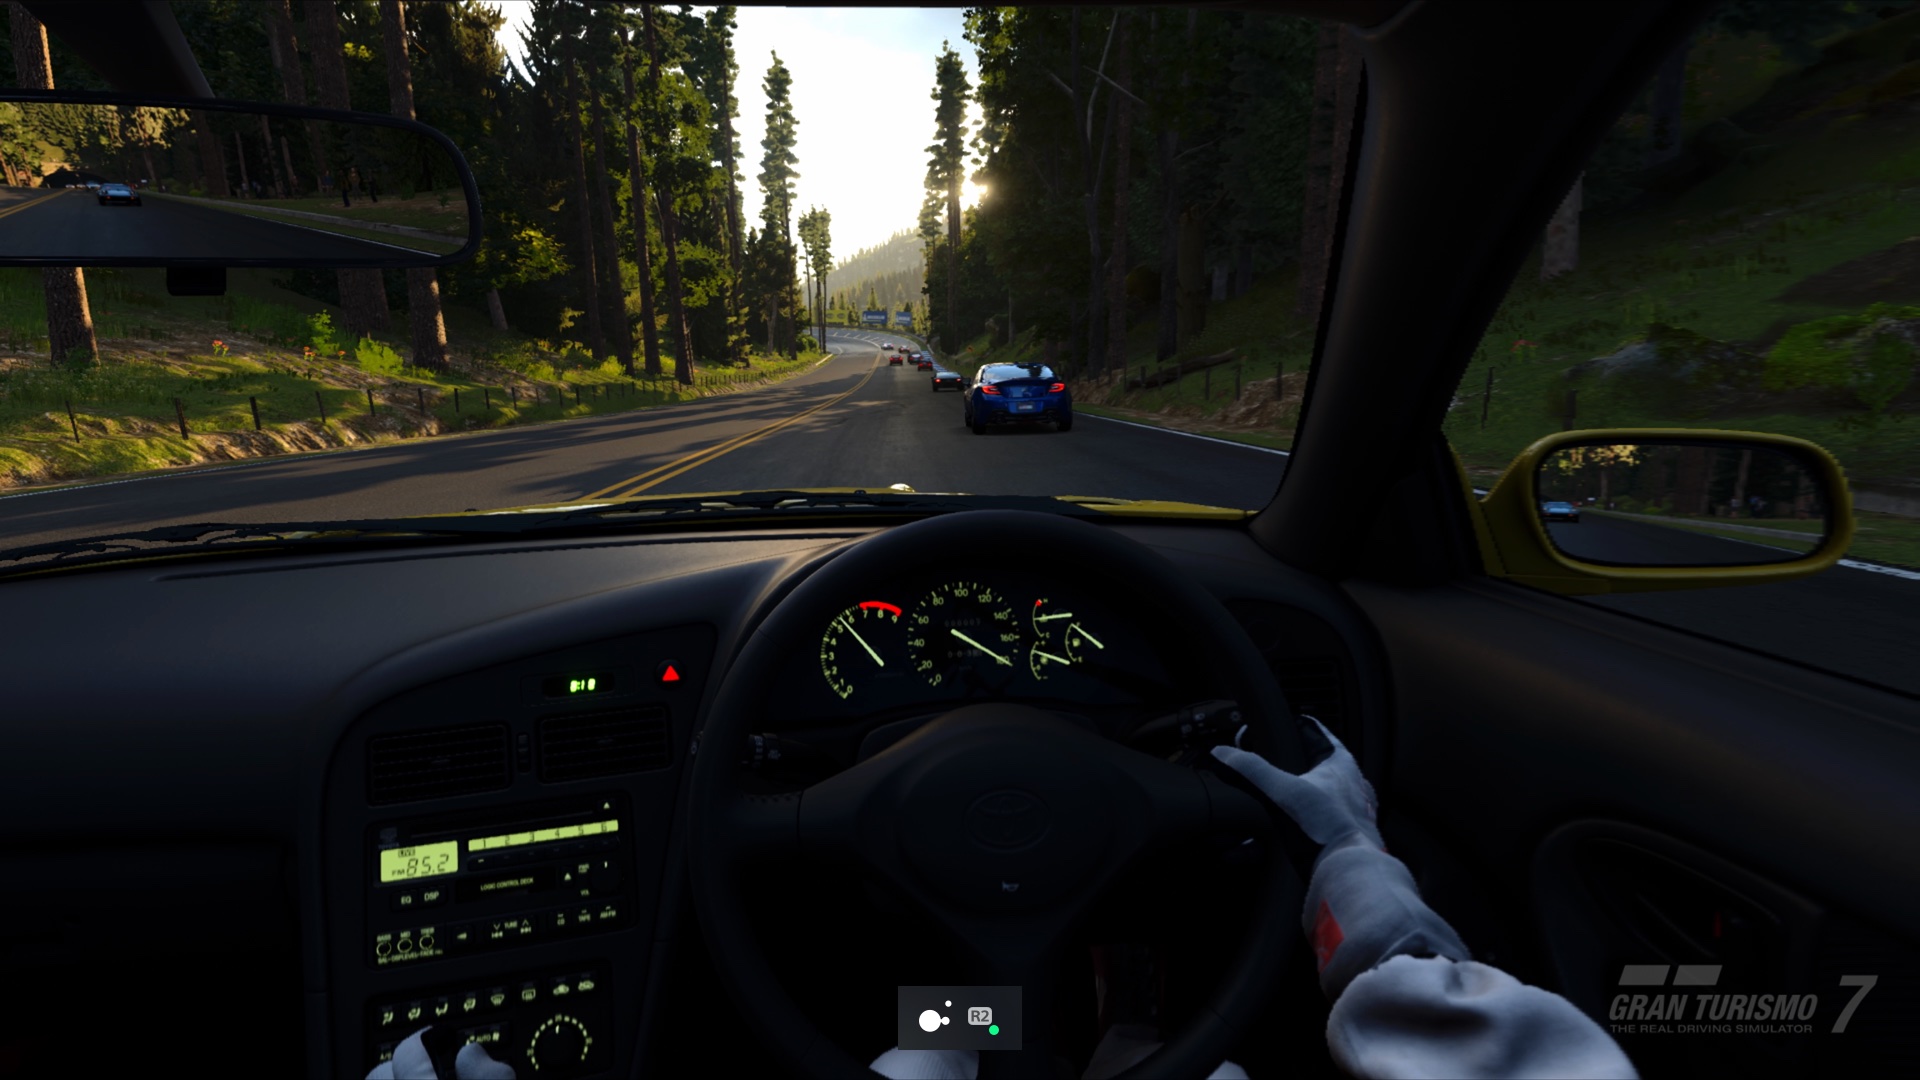  "PS5 screenshot of Gran Turismo 7 showing toggle mode enabled for the “R2” button on the Access controller"